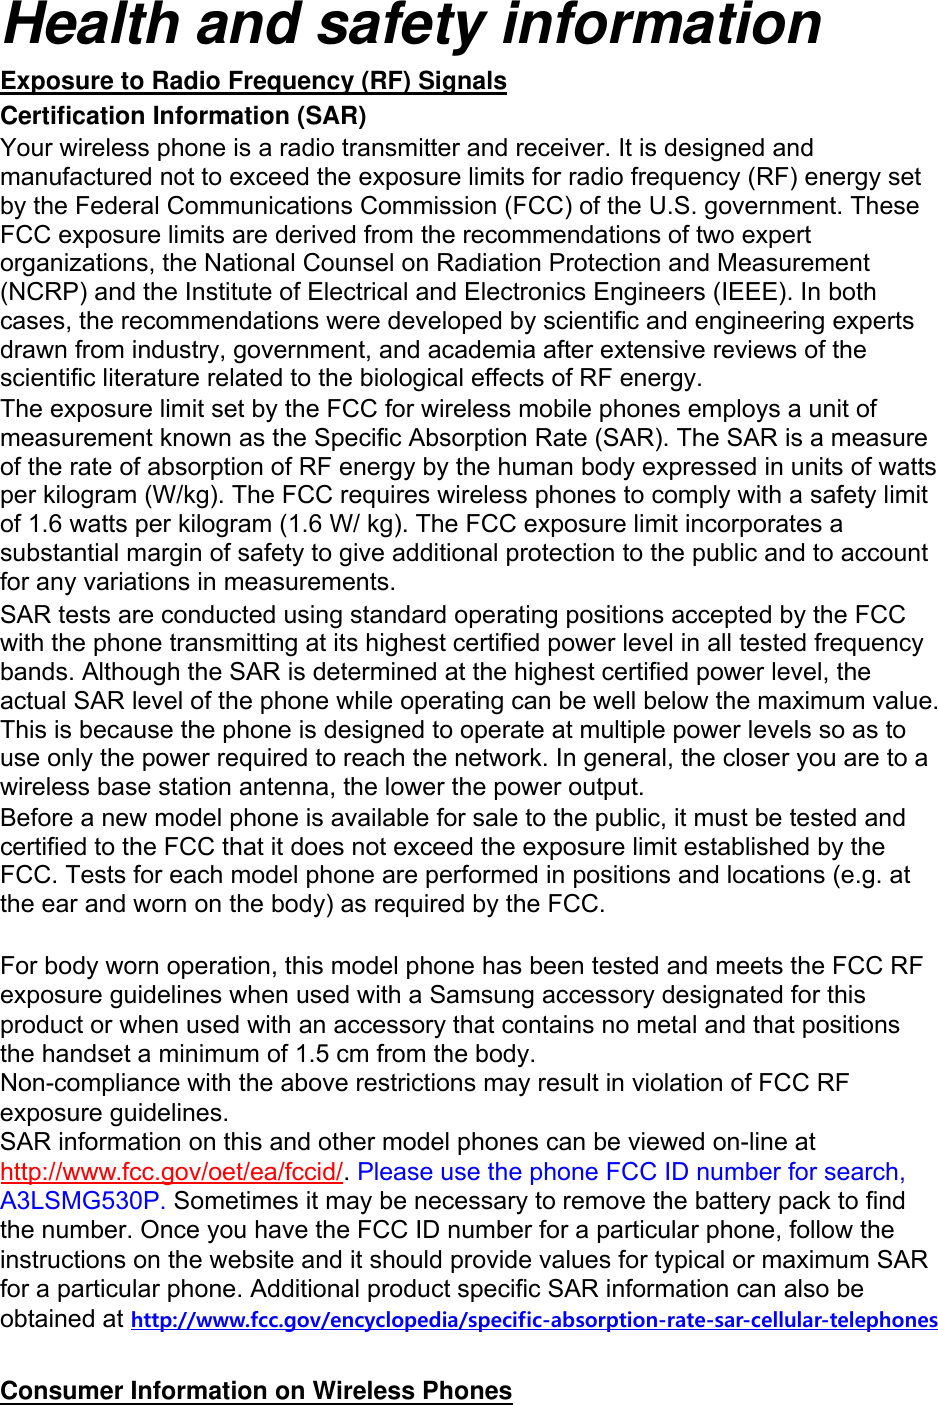 Health and safety information Exposure to Radio Frequency (RF) Signals Certification Information (SAR) Your wireless phone is a radio transmitter and receiver. It is designed and manufactured not to exceed the exposure limits for radio frequency (RF) energy set by the Federal Communications Commission (FCC) of the U.S. government. These FCC exposure limits are derived from the recommendations of two expert organizations, the National Counsel on Radiation Protection and Measurement (NCRP) and the Institute of Electrical and Electronics Engineers (IEEE). In both cases, the recommendations were developed by scientific and engineering experts drawn from industry, government, and academia after extensive reviews of the scientific literature related to the biological effects of RF energy. The exposure limit set by the FCC for wireless mobile phones employs a unit of measurement known as the Specific Absorption Rate (SAR). The SAR is a measure of the rate of absorption of RF energy by the human body expressed in units of watts per kilogram (W/kg). The FCC requires wireless phones to comply with a safety limit of 1.6 watts per kilogram (1.6 W/ kg). The FCC exposure limit incorporates a substantial margin of safety to give additional protection to the public and to account for any variations in measurements. SAR tests are conducted using standard operating positions accepted by the FCC with the phone transmitting at its highest certified power level in all tested frequency bands. Although the SAR is determined at the highest certified power level, the actual SAR level of the phone while operating can be well below the maximum value. This is because the phone is designed to operate at multiple power levels so as to use only the power required to reach the network. In general, the closer you are to a wireless base station antenna, the lower the power output. Before a new model phone is available for sale to the public, it must be tested and certified to the FCC that it does not exceed the exposure limit established by the FCC. Tests for each model phone are performed in positions and locations (e.g. at the ear and worn on the body) as required by the FCC.     For body worn operation, this model phone has been tested and meets the FCC RF exposure guidelines when used with a Samsung accessory designated for this product or when used with an accessory that contains no metal and that positions the handset a minimum of 1.5 cm from the body.  Non-compliance with the above restrictions may result in violation of FCC RF exposure guidelines. SAR information on this and other model phones can be viewed on-line at http://www.fcc.gov/oet/ea/fccid/. Please use the phone FCC ID number for search, A3LSMG530P. Sometimes it may be necessary to remove the battery pack to find the number. Once you have the FCC ID number for a particular phone, follow the instructions on the website and it should provide values for typical or maximum SAR for a particular phone. Additional product specific SAR information can also be obtained at http://www.fcc.gov/encyclopedia/specific-absorption-rate-sar-cellular-telephonesConsumer Information on Wireless Phones 